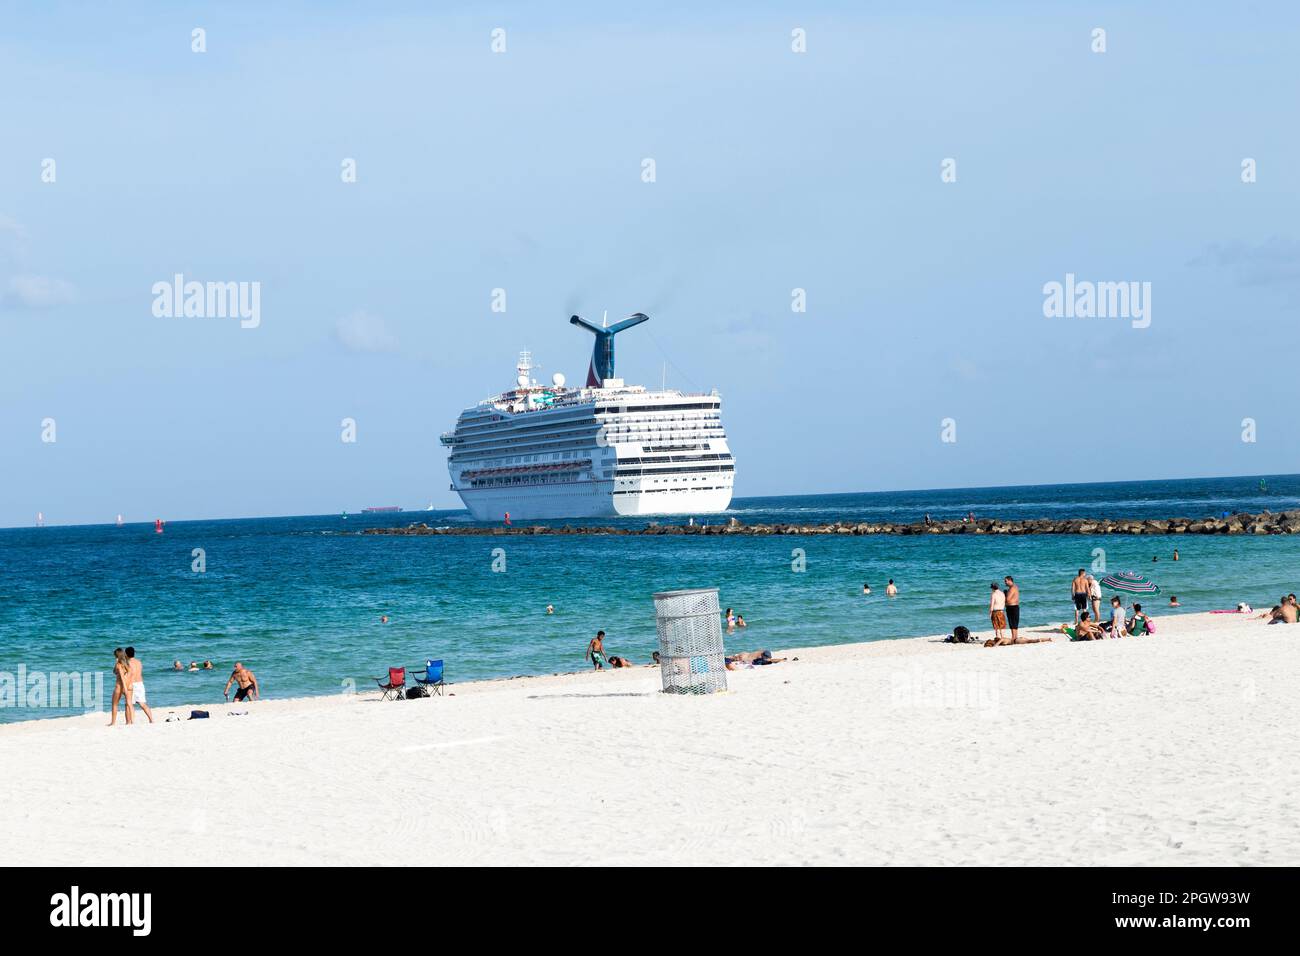 Miami, USA - August 18, 2014: People enjoying the beach next to the cruise ship Carnival victory leaving Miami harbor to the Carribean. Stock Photo